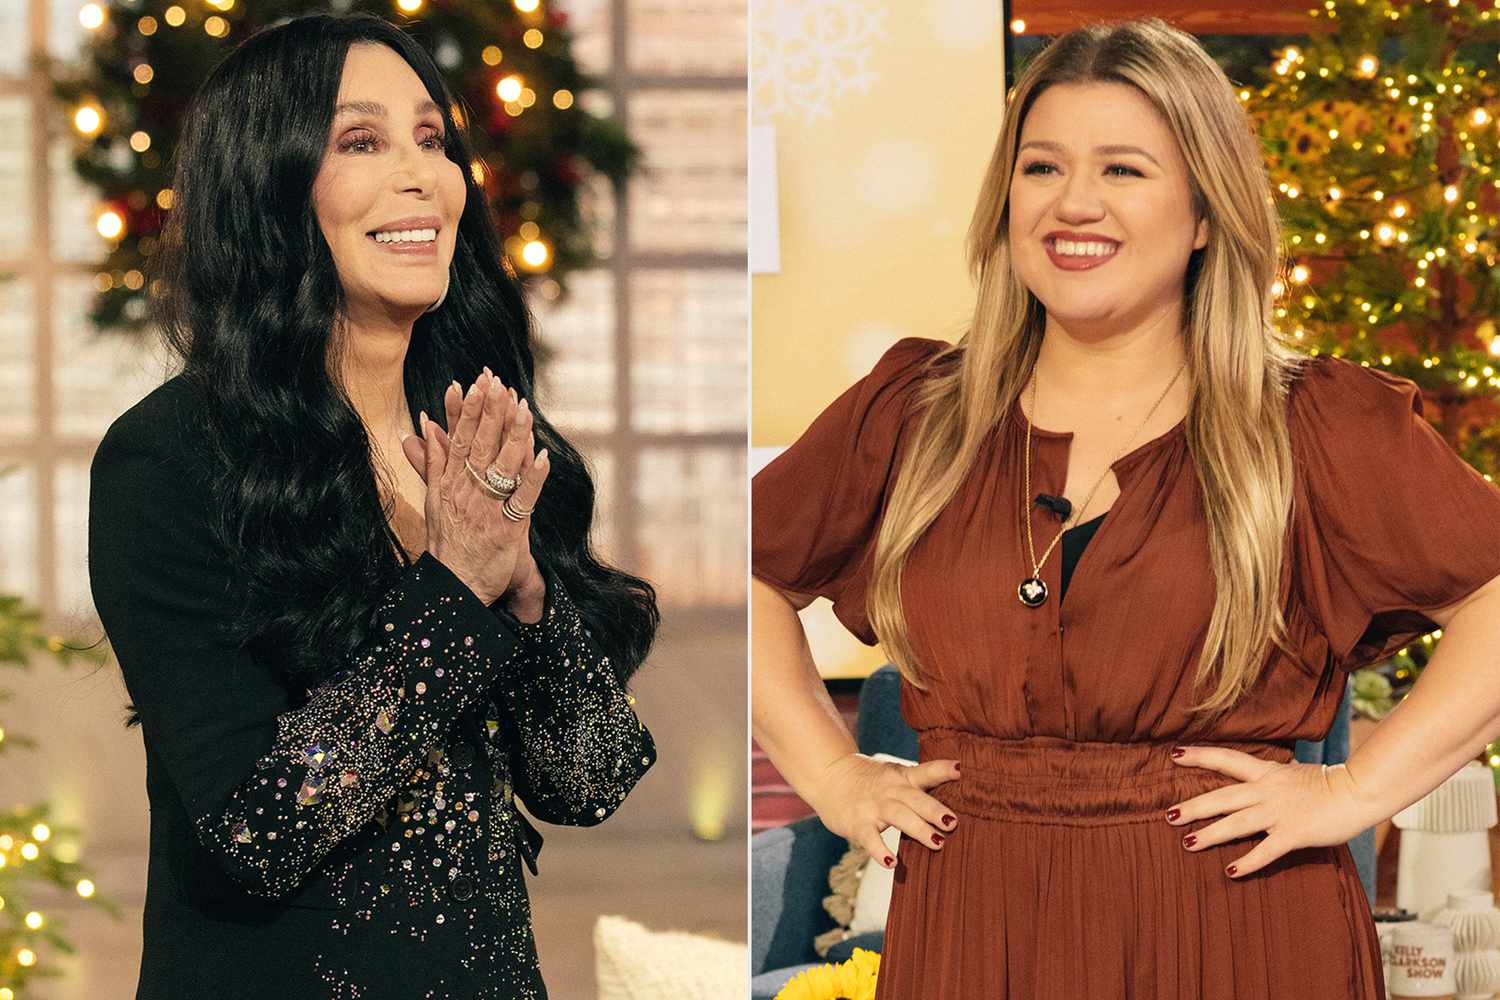 Cher and Kelly Clarkson swap tales about contact highs from Willie Nelson's tour bus - Entertainment Weekly News